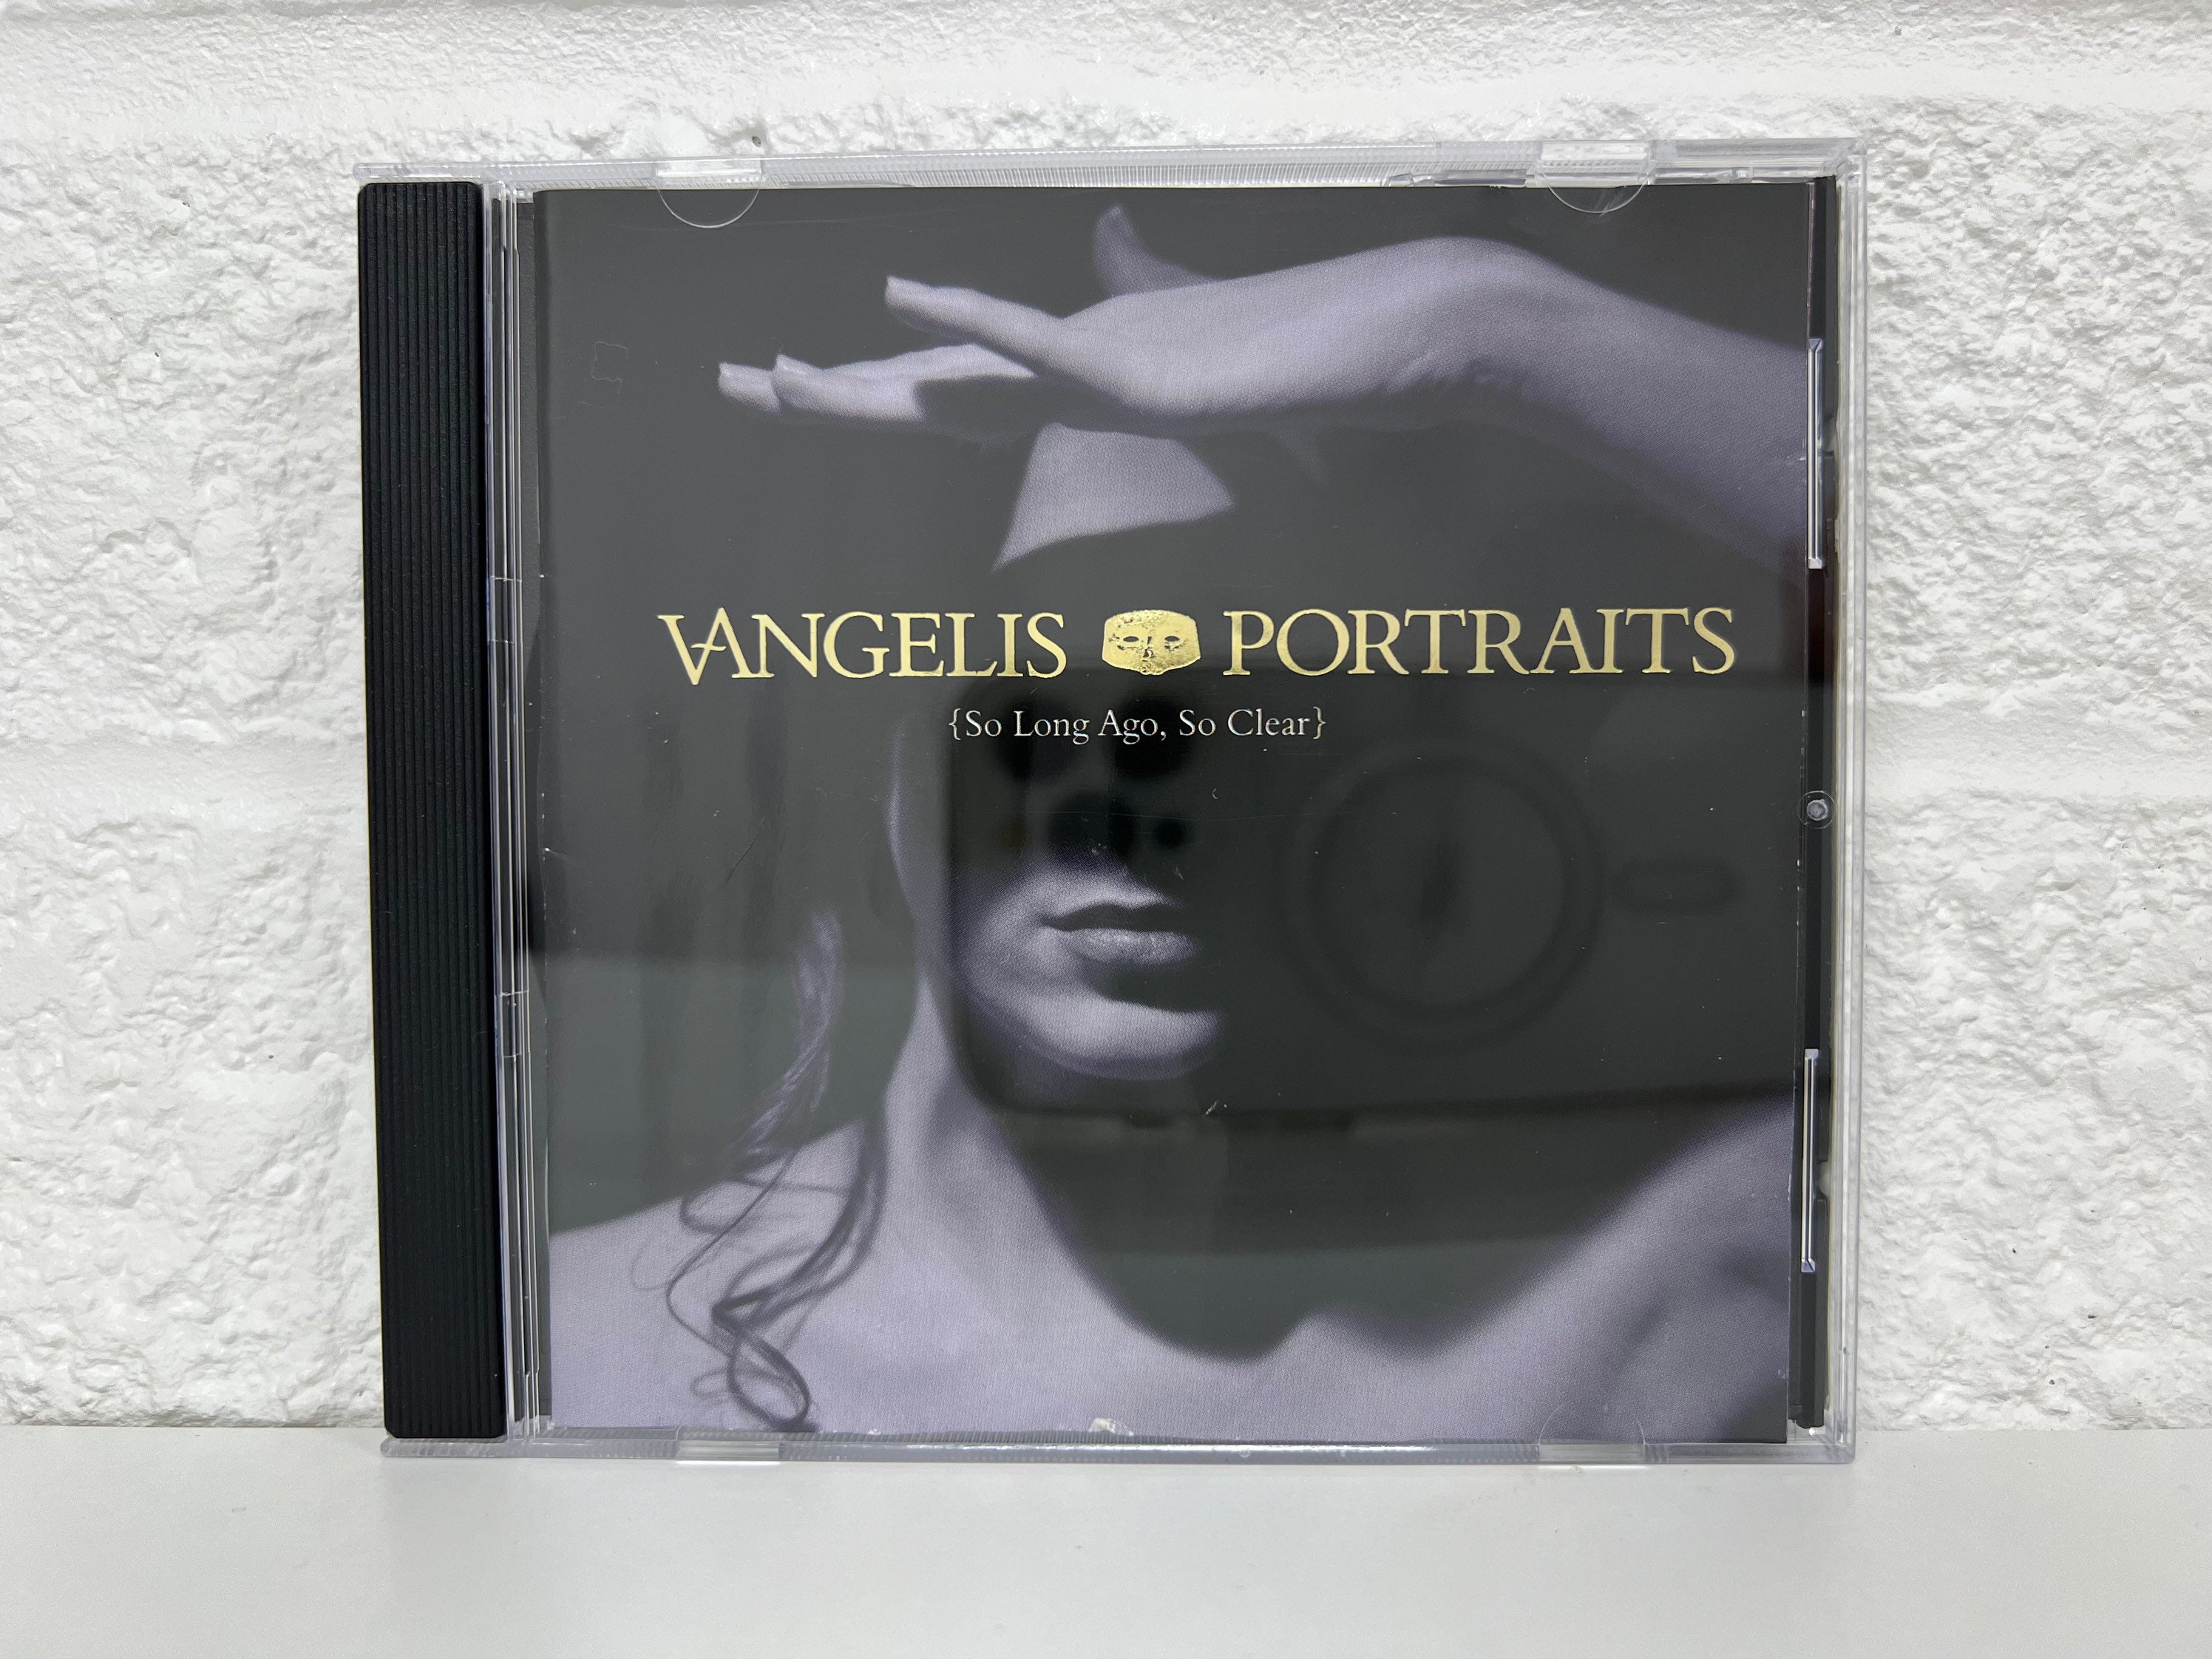 Vangelis CD Collection Album Portraits So Long Ago So Clear Genre  Electronic Gifts Vintage Music Greek Musician Composer